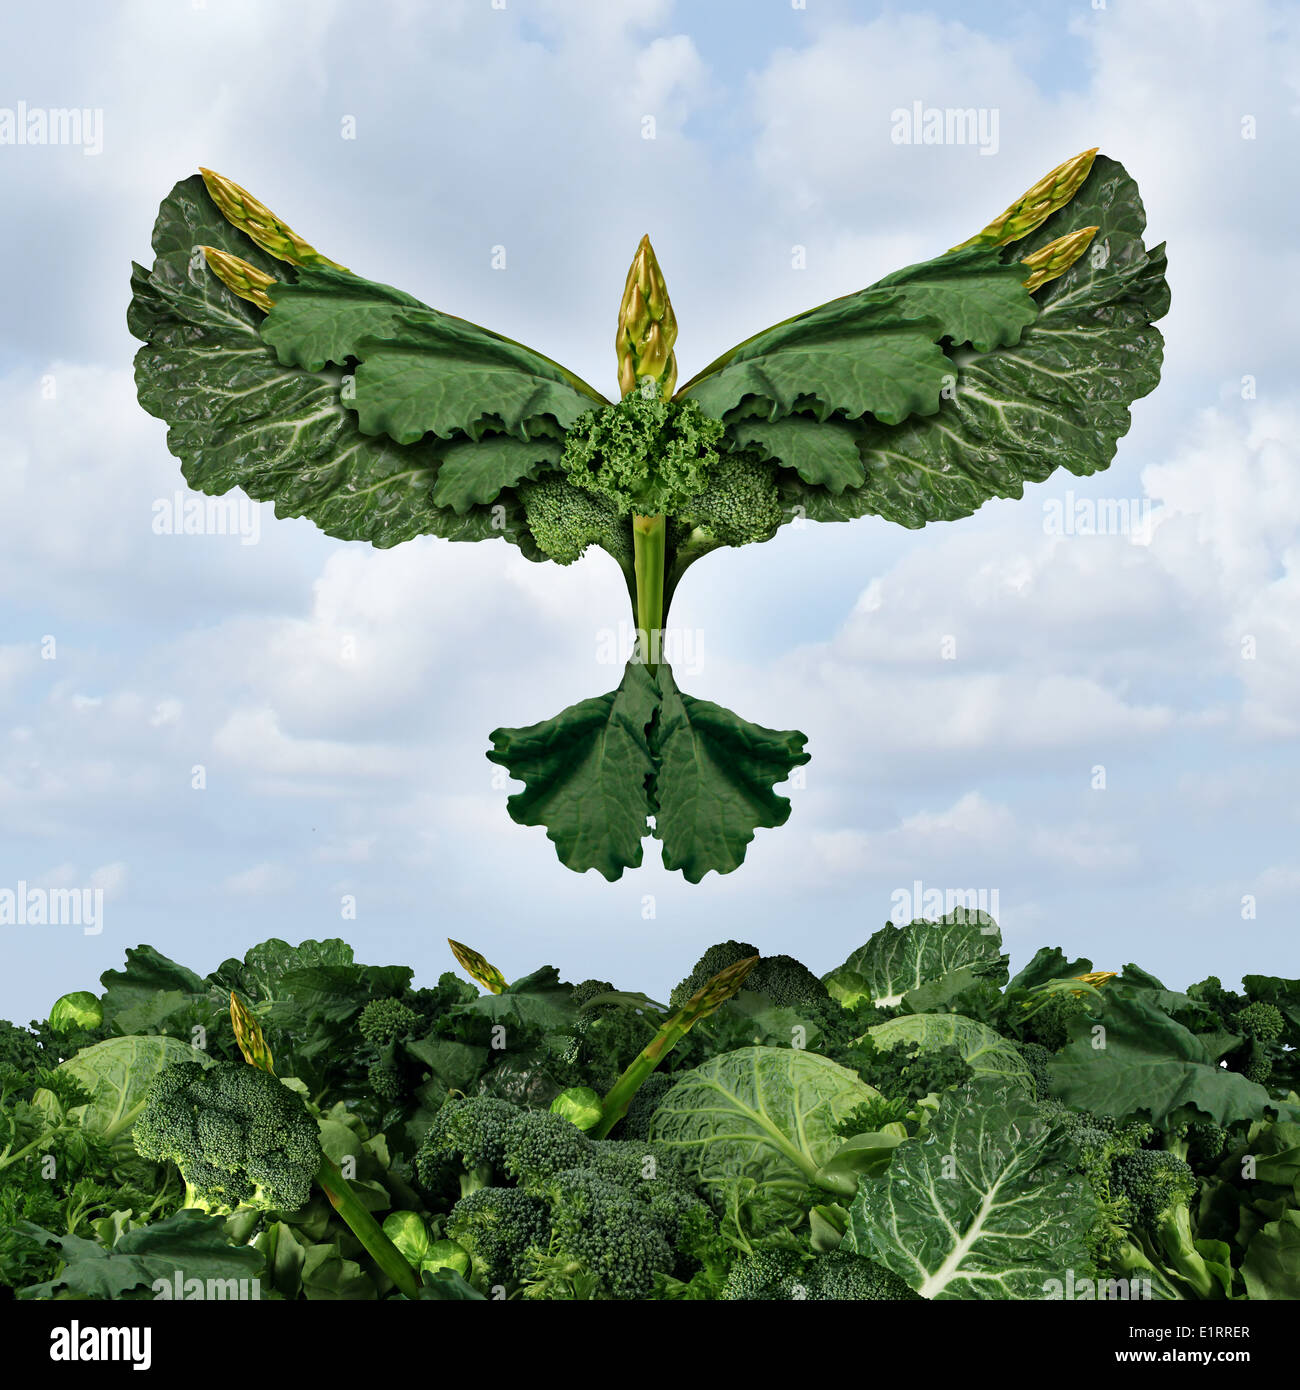 Health food freedom diet concept with green vegetables and dark leafy food shaped as a bird flying upward as a healthy eating Stock Photo